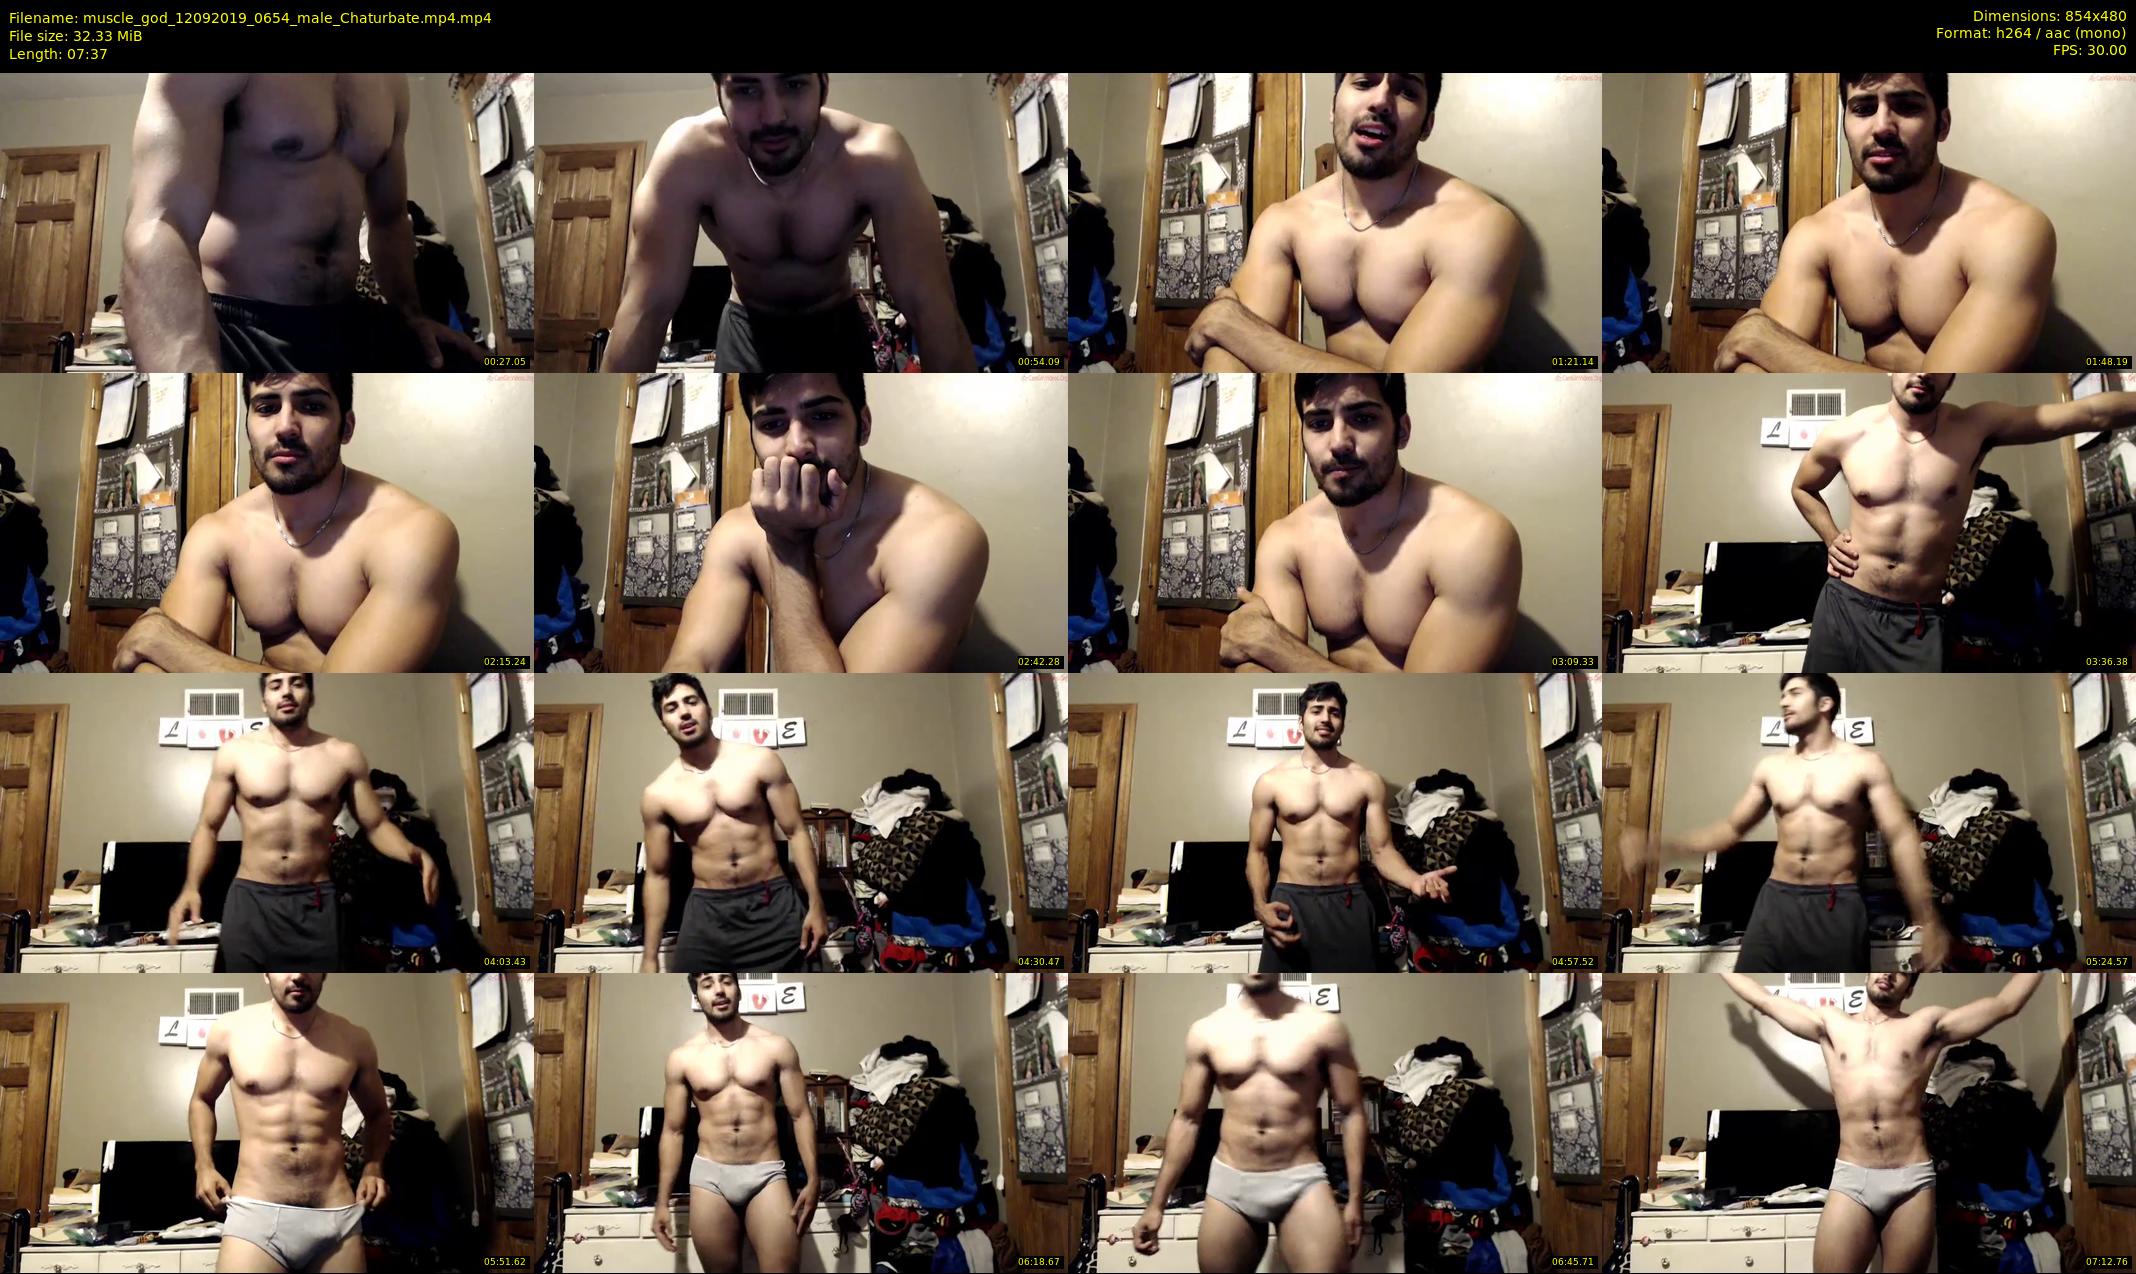 Muscle_god chaturbate